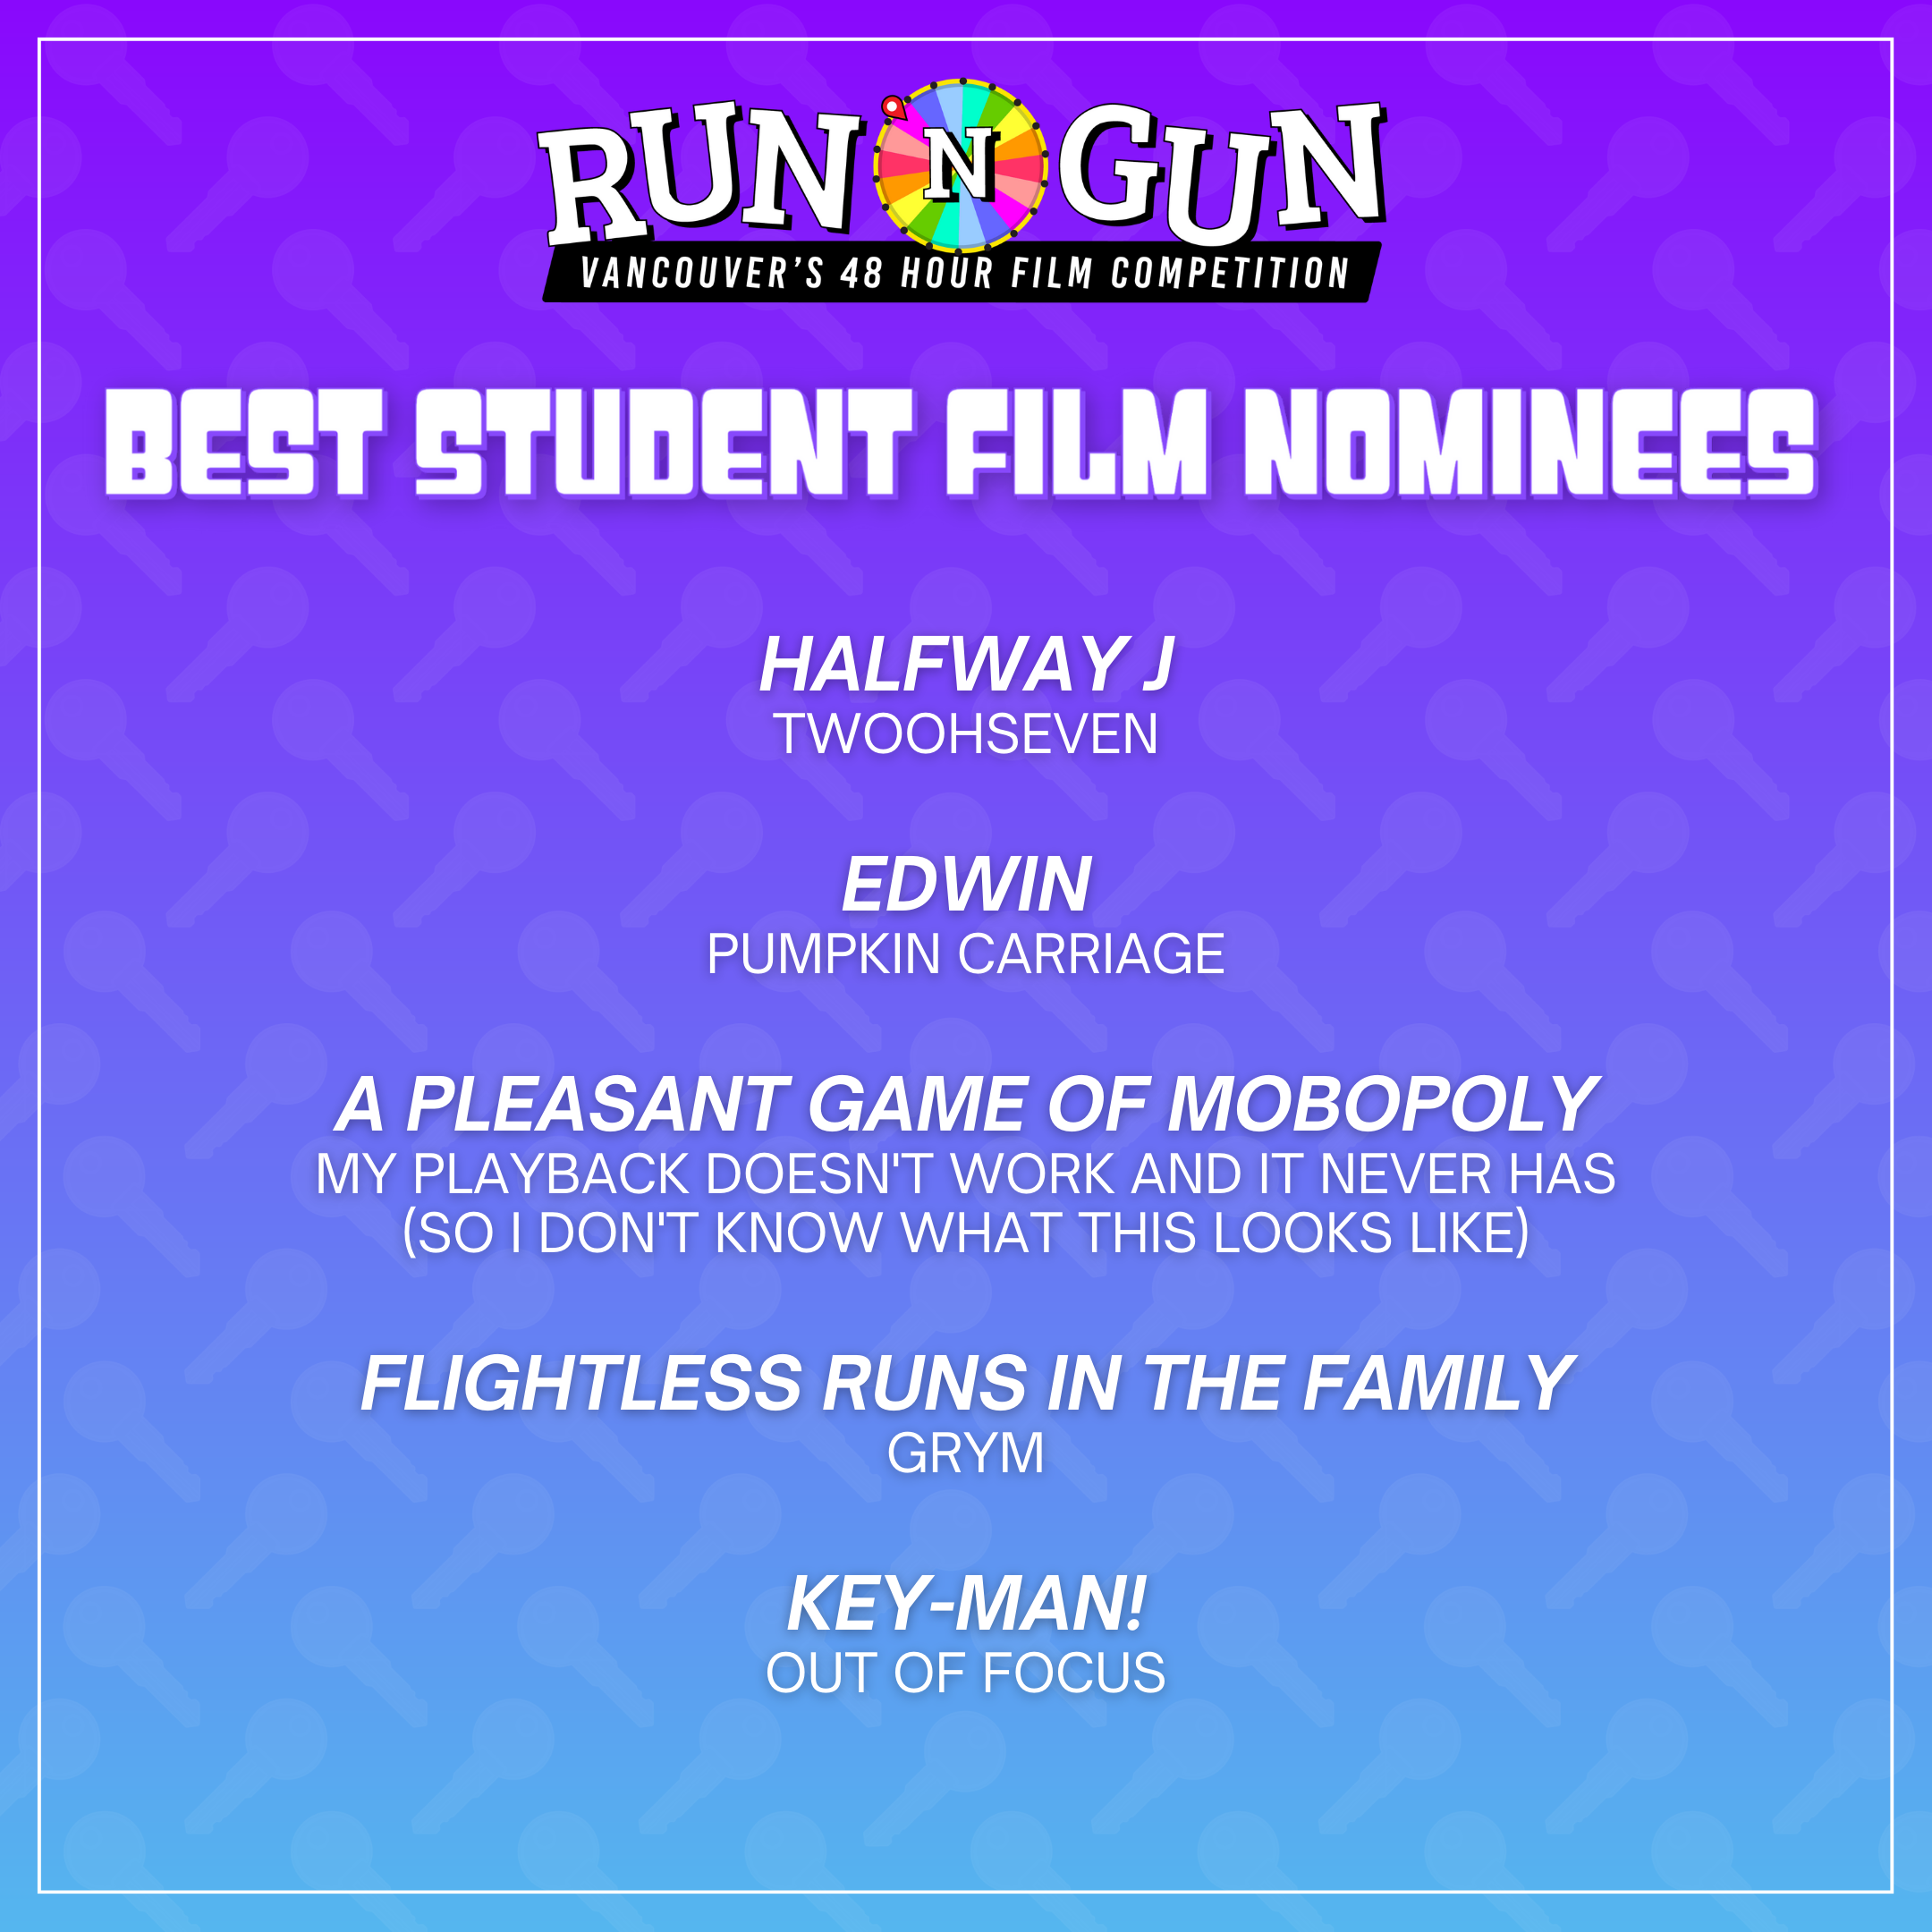 Best_Student_Film_Nominee_1.png